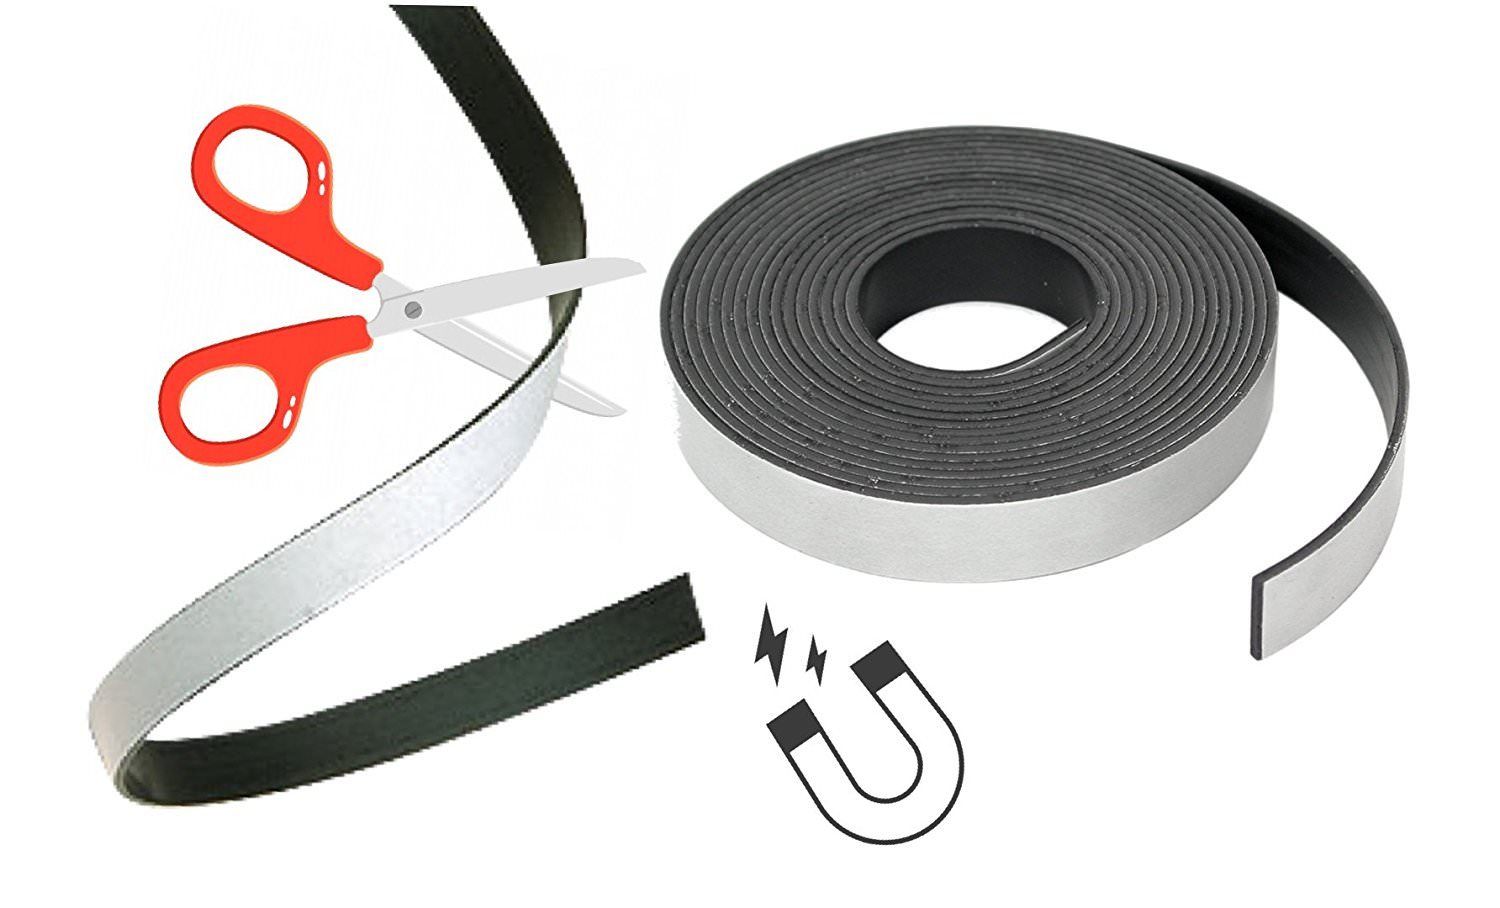 High Energy Magnetic Tape/Strips, Flexible Magnets - very strong